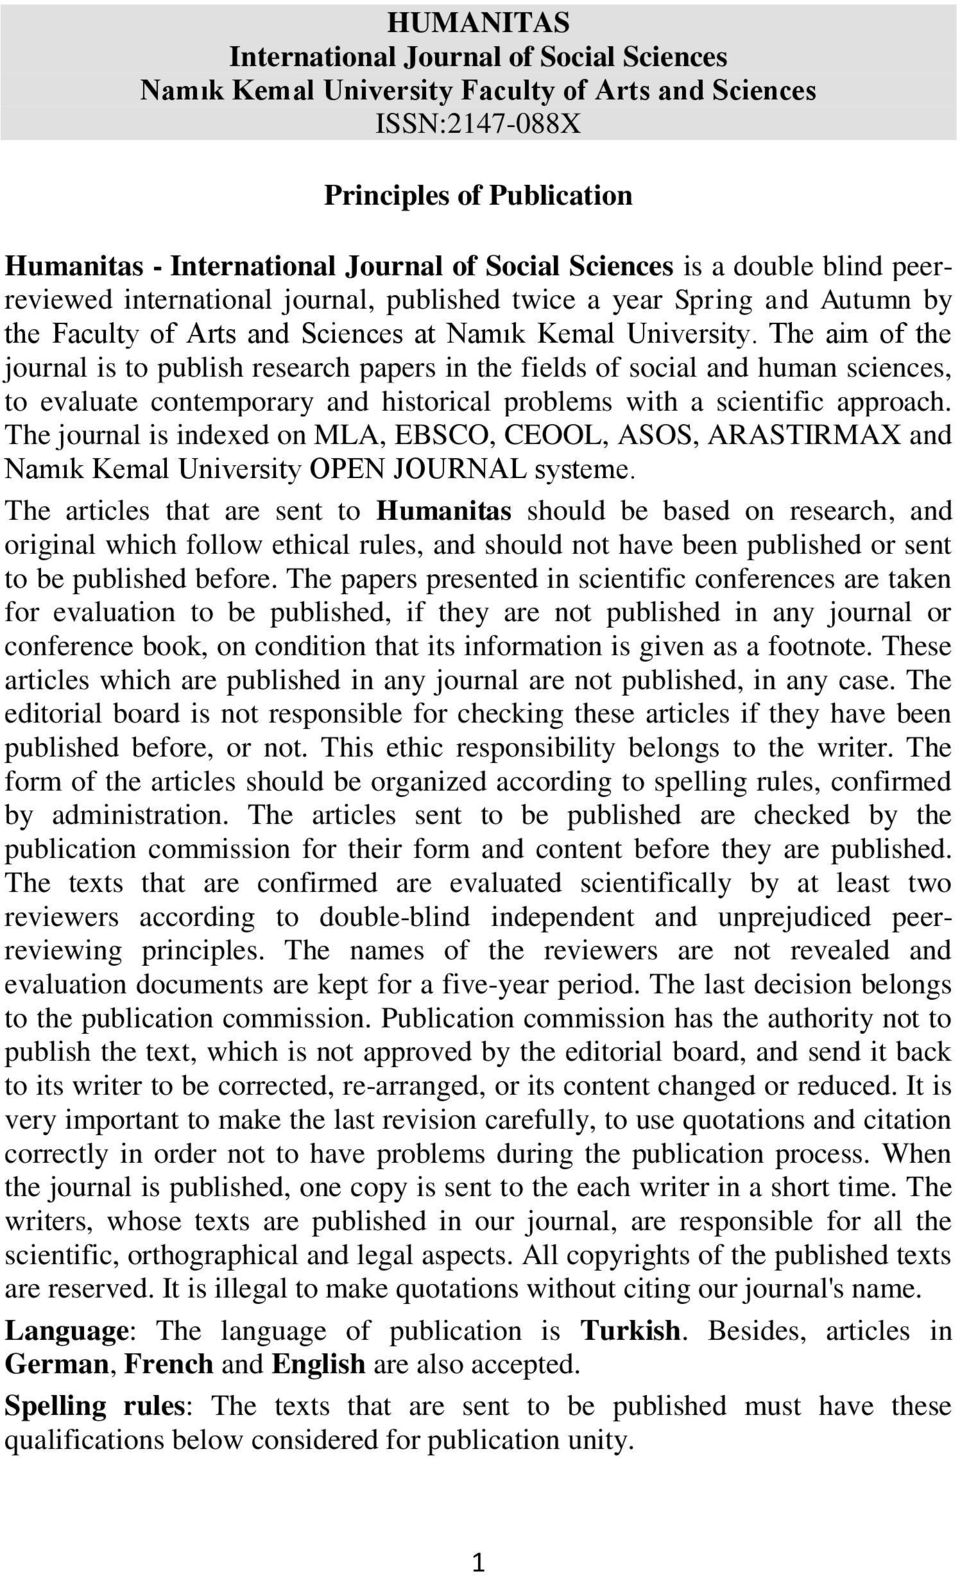 The aim of the journal is to publish research papers in the fields of social and human sciences, to evaluate contemporary and historical problems with a scientific approach.